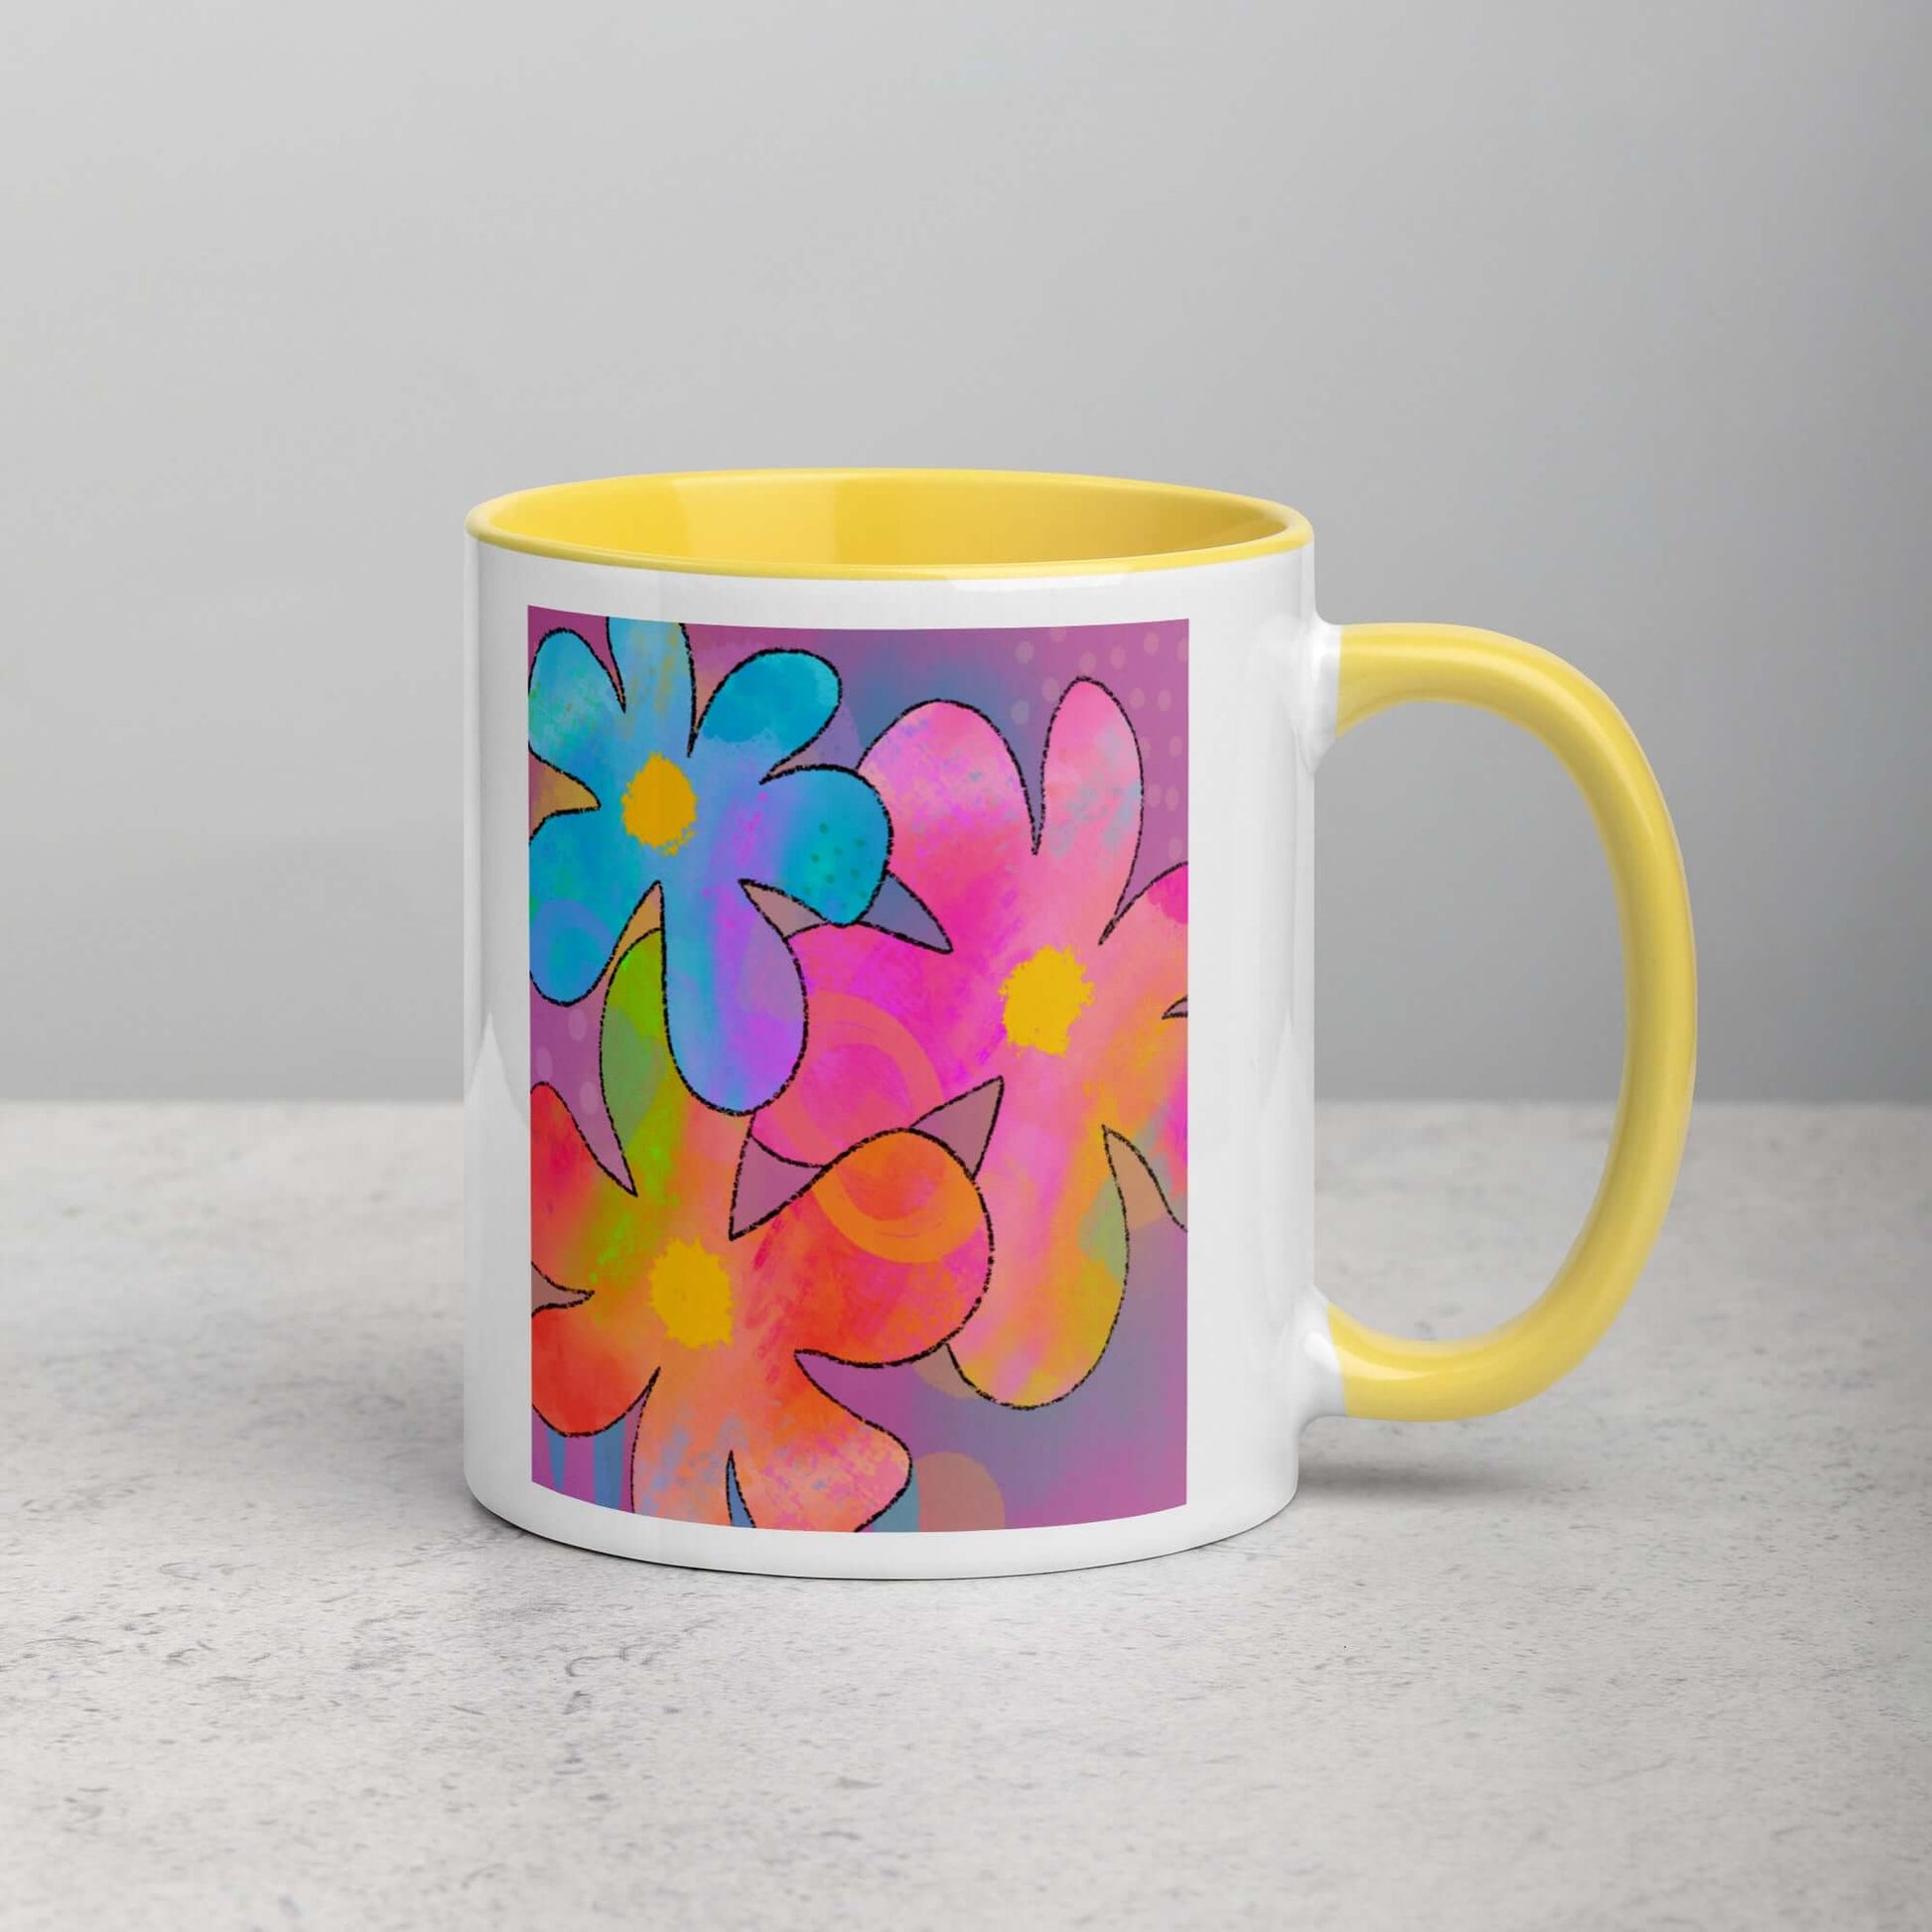 Big Colorful 1960s Psychedelic “Hippie Flowers” Mug with Bright Yellow Color Inside Right Handed Front View